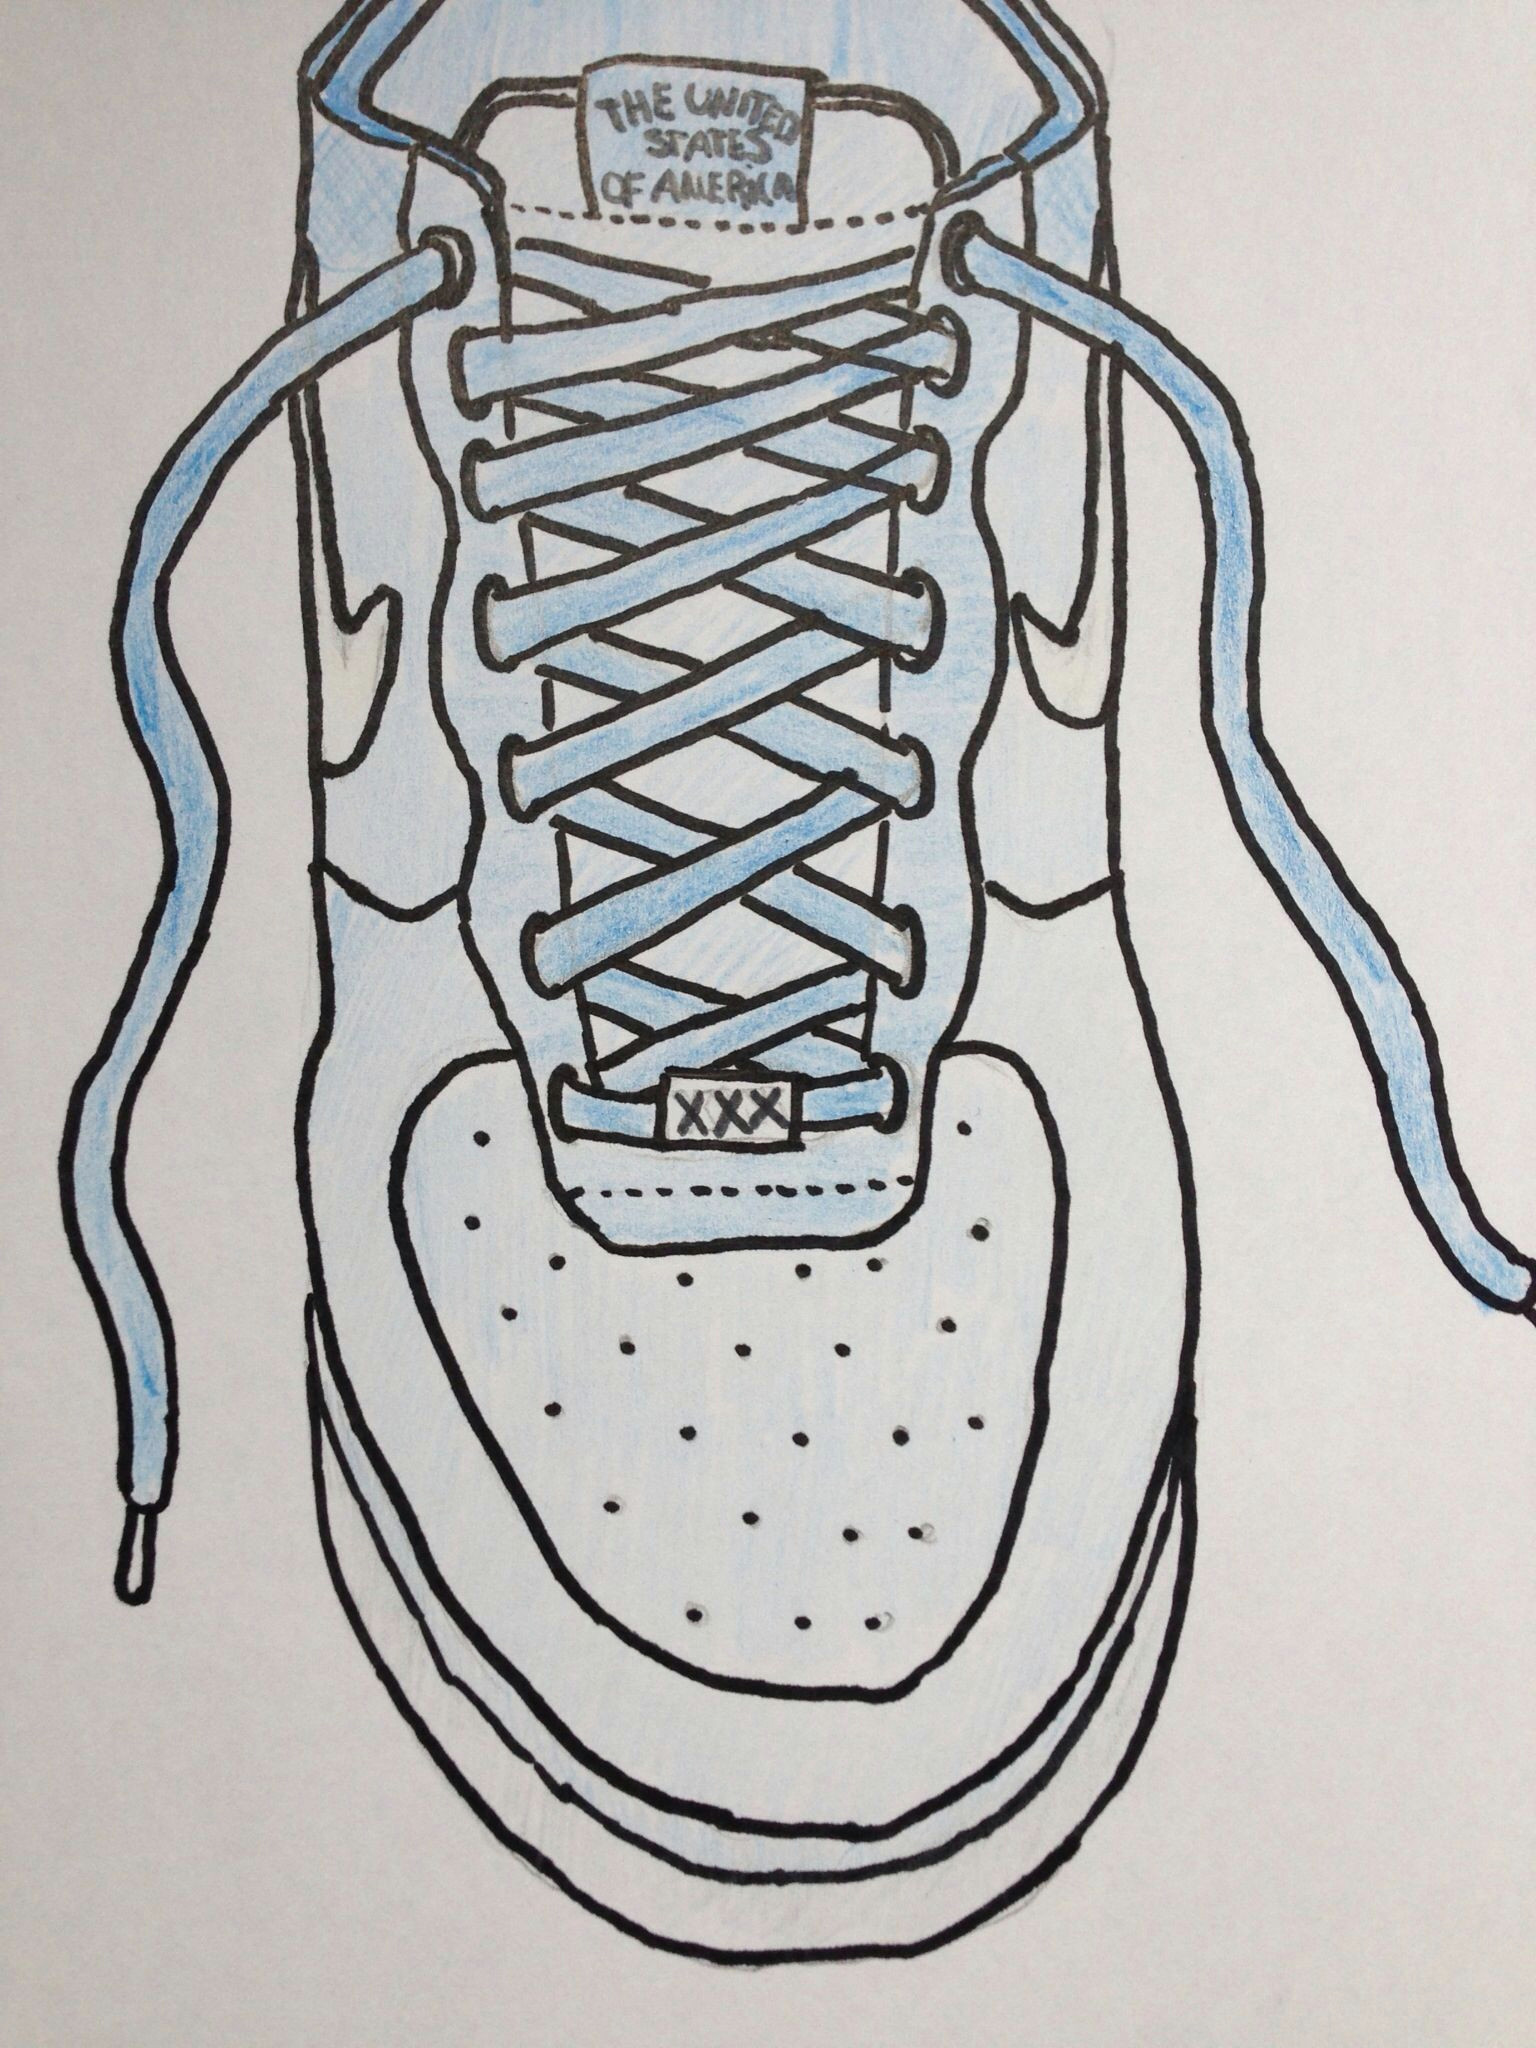 Air force 1 Cartoon Drawing Nike Air force 1 Year 7 Shoes Project In 2019 Air force 1 Nike